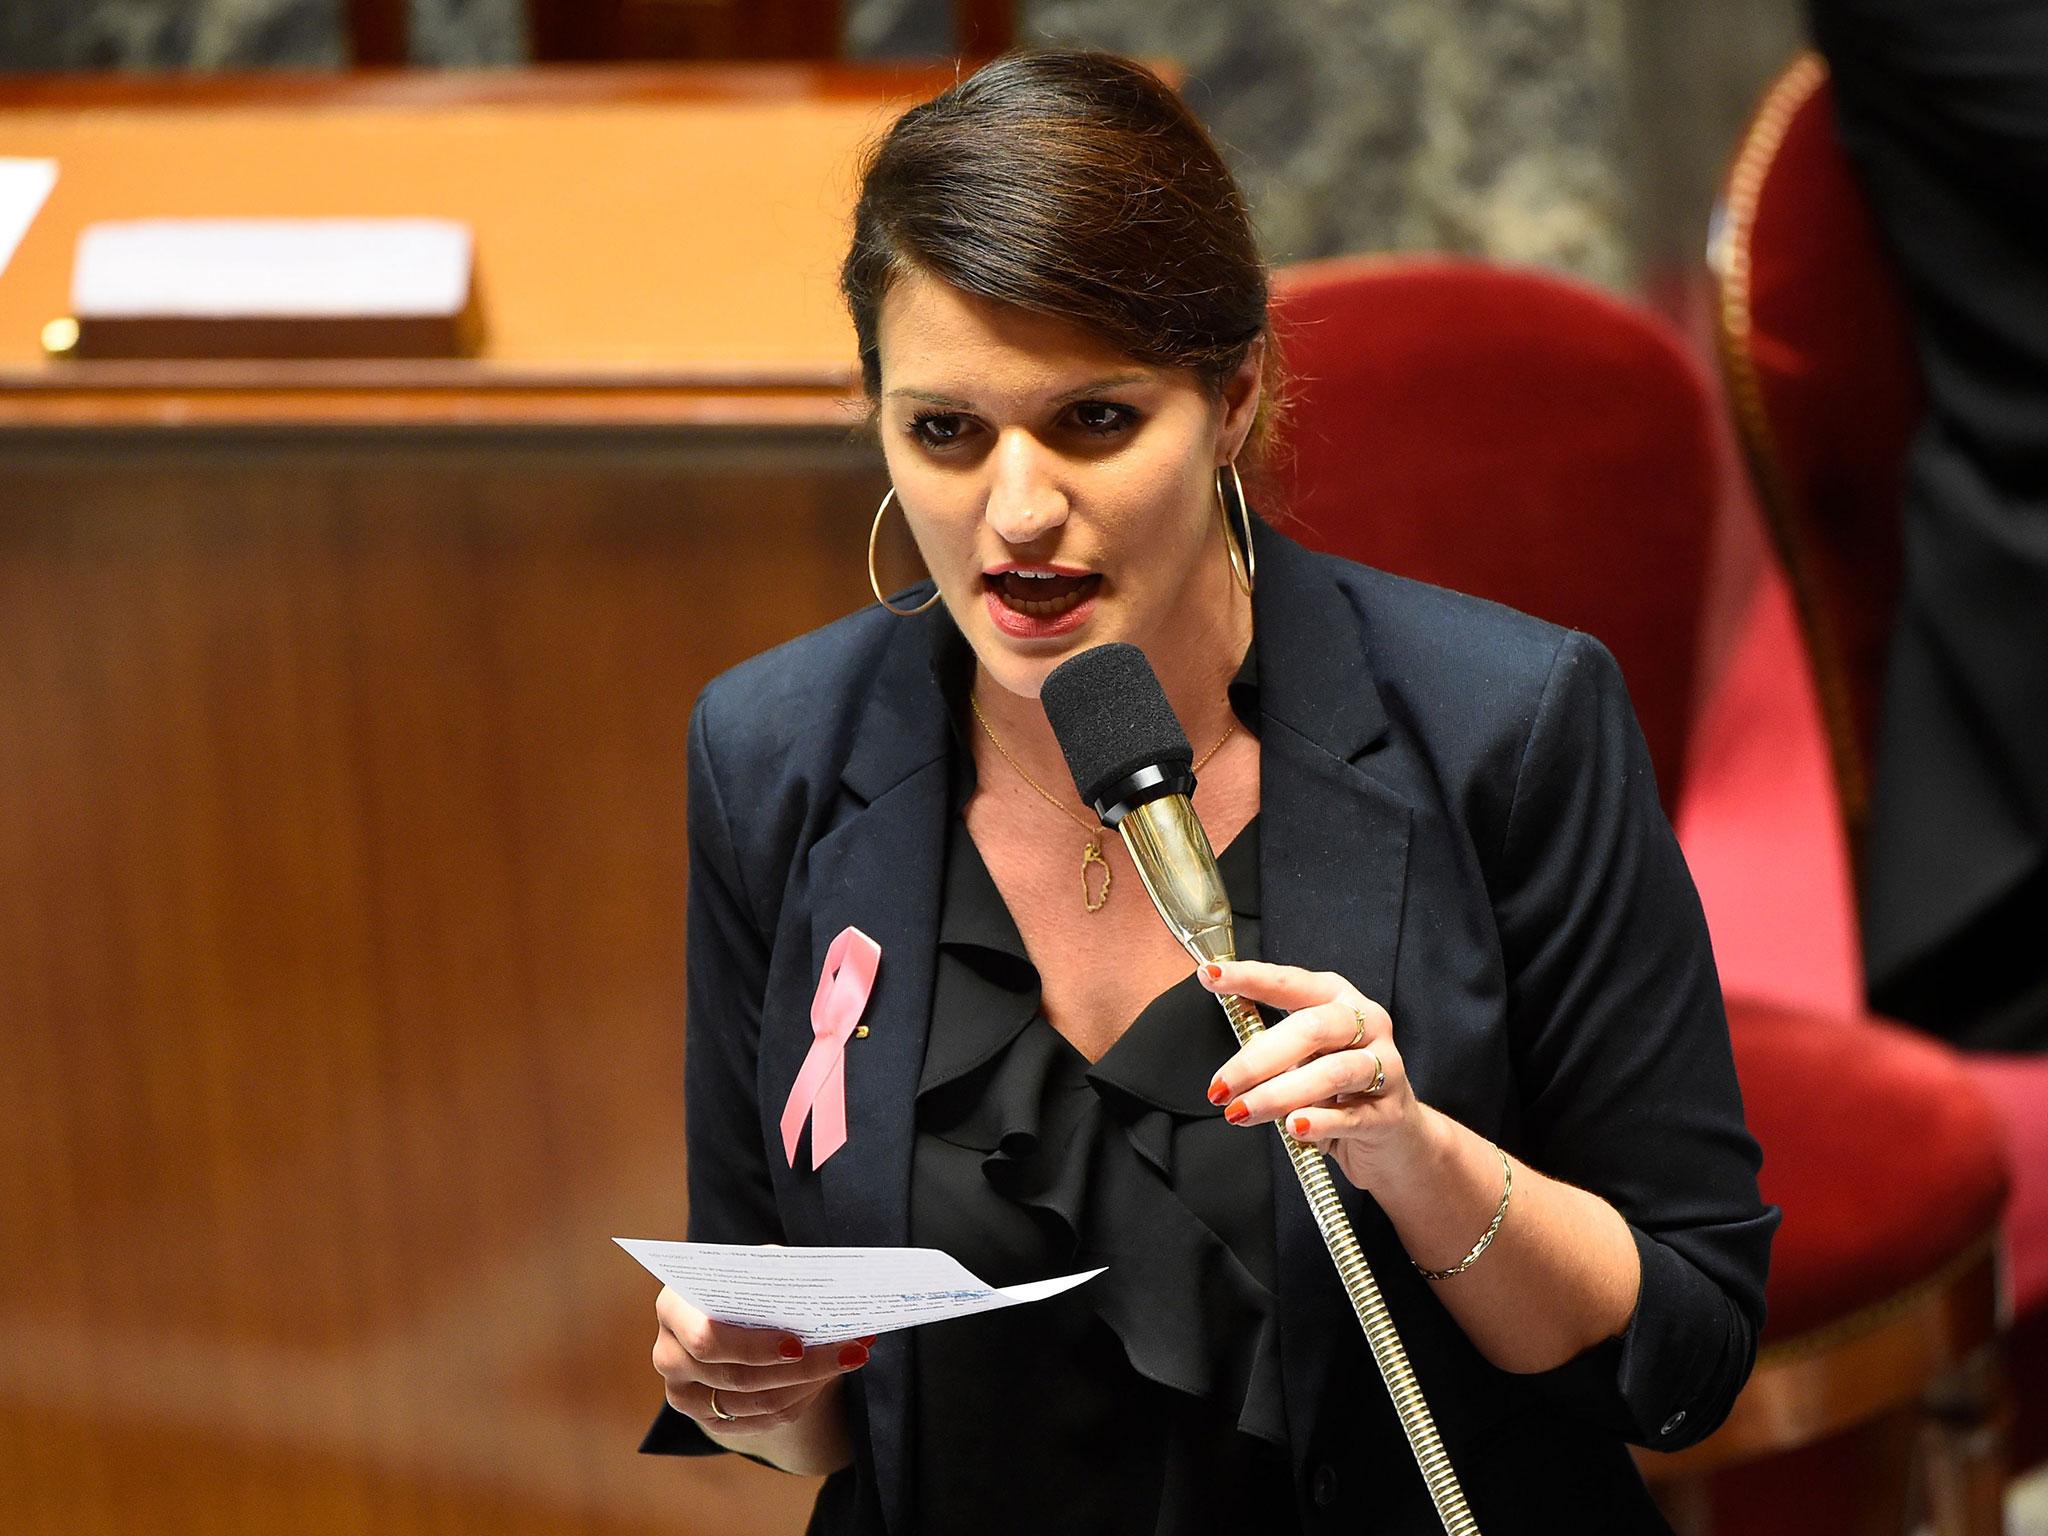 Marlene Schiappa, French Junior Minister for Gender Equality, is heading the campaign against sexual harassment